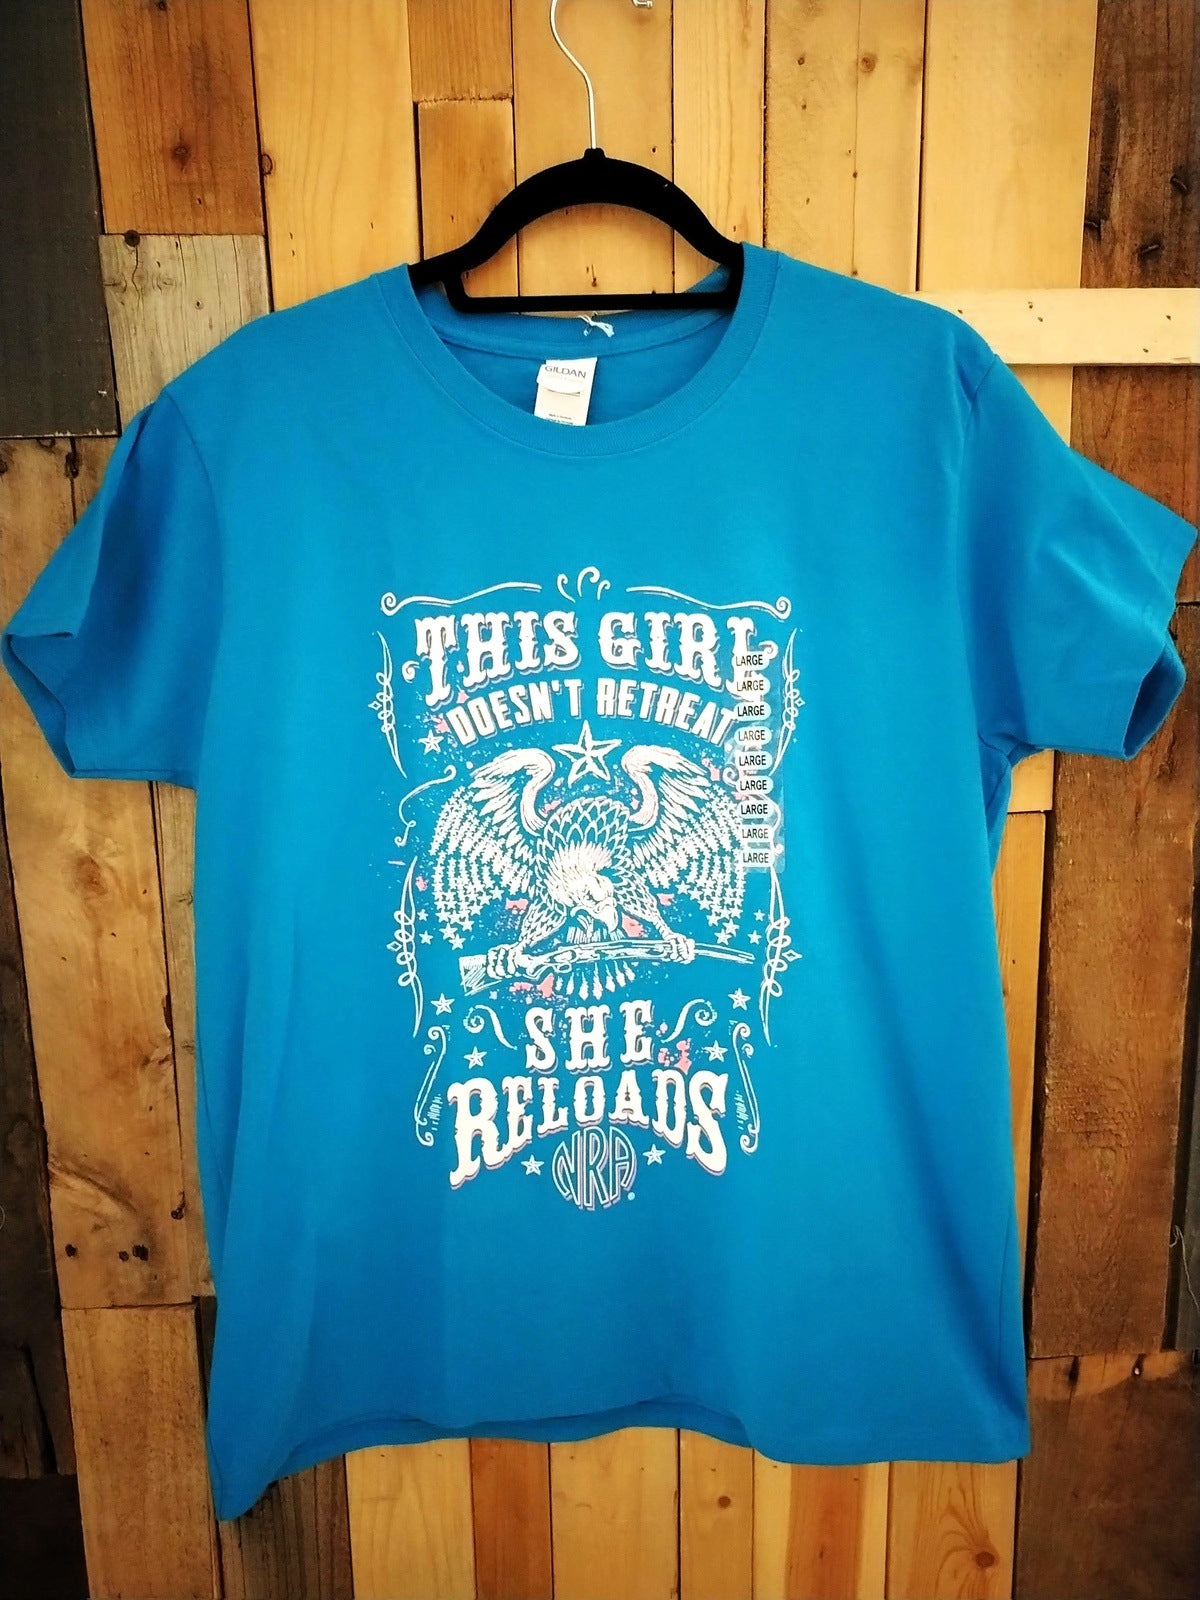 NRA T Shirt "This Girl Doesn't Retreat..." Size Large - New!